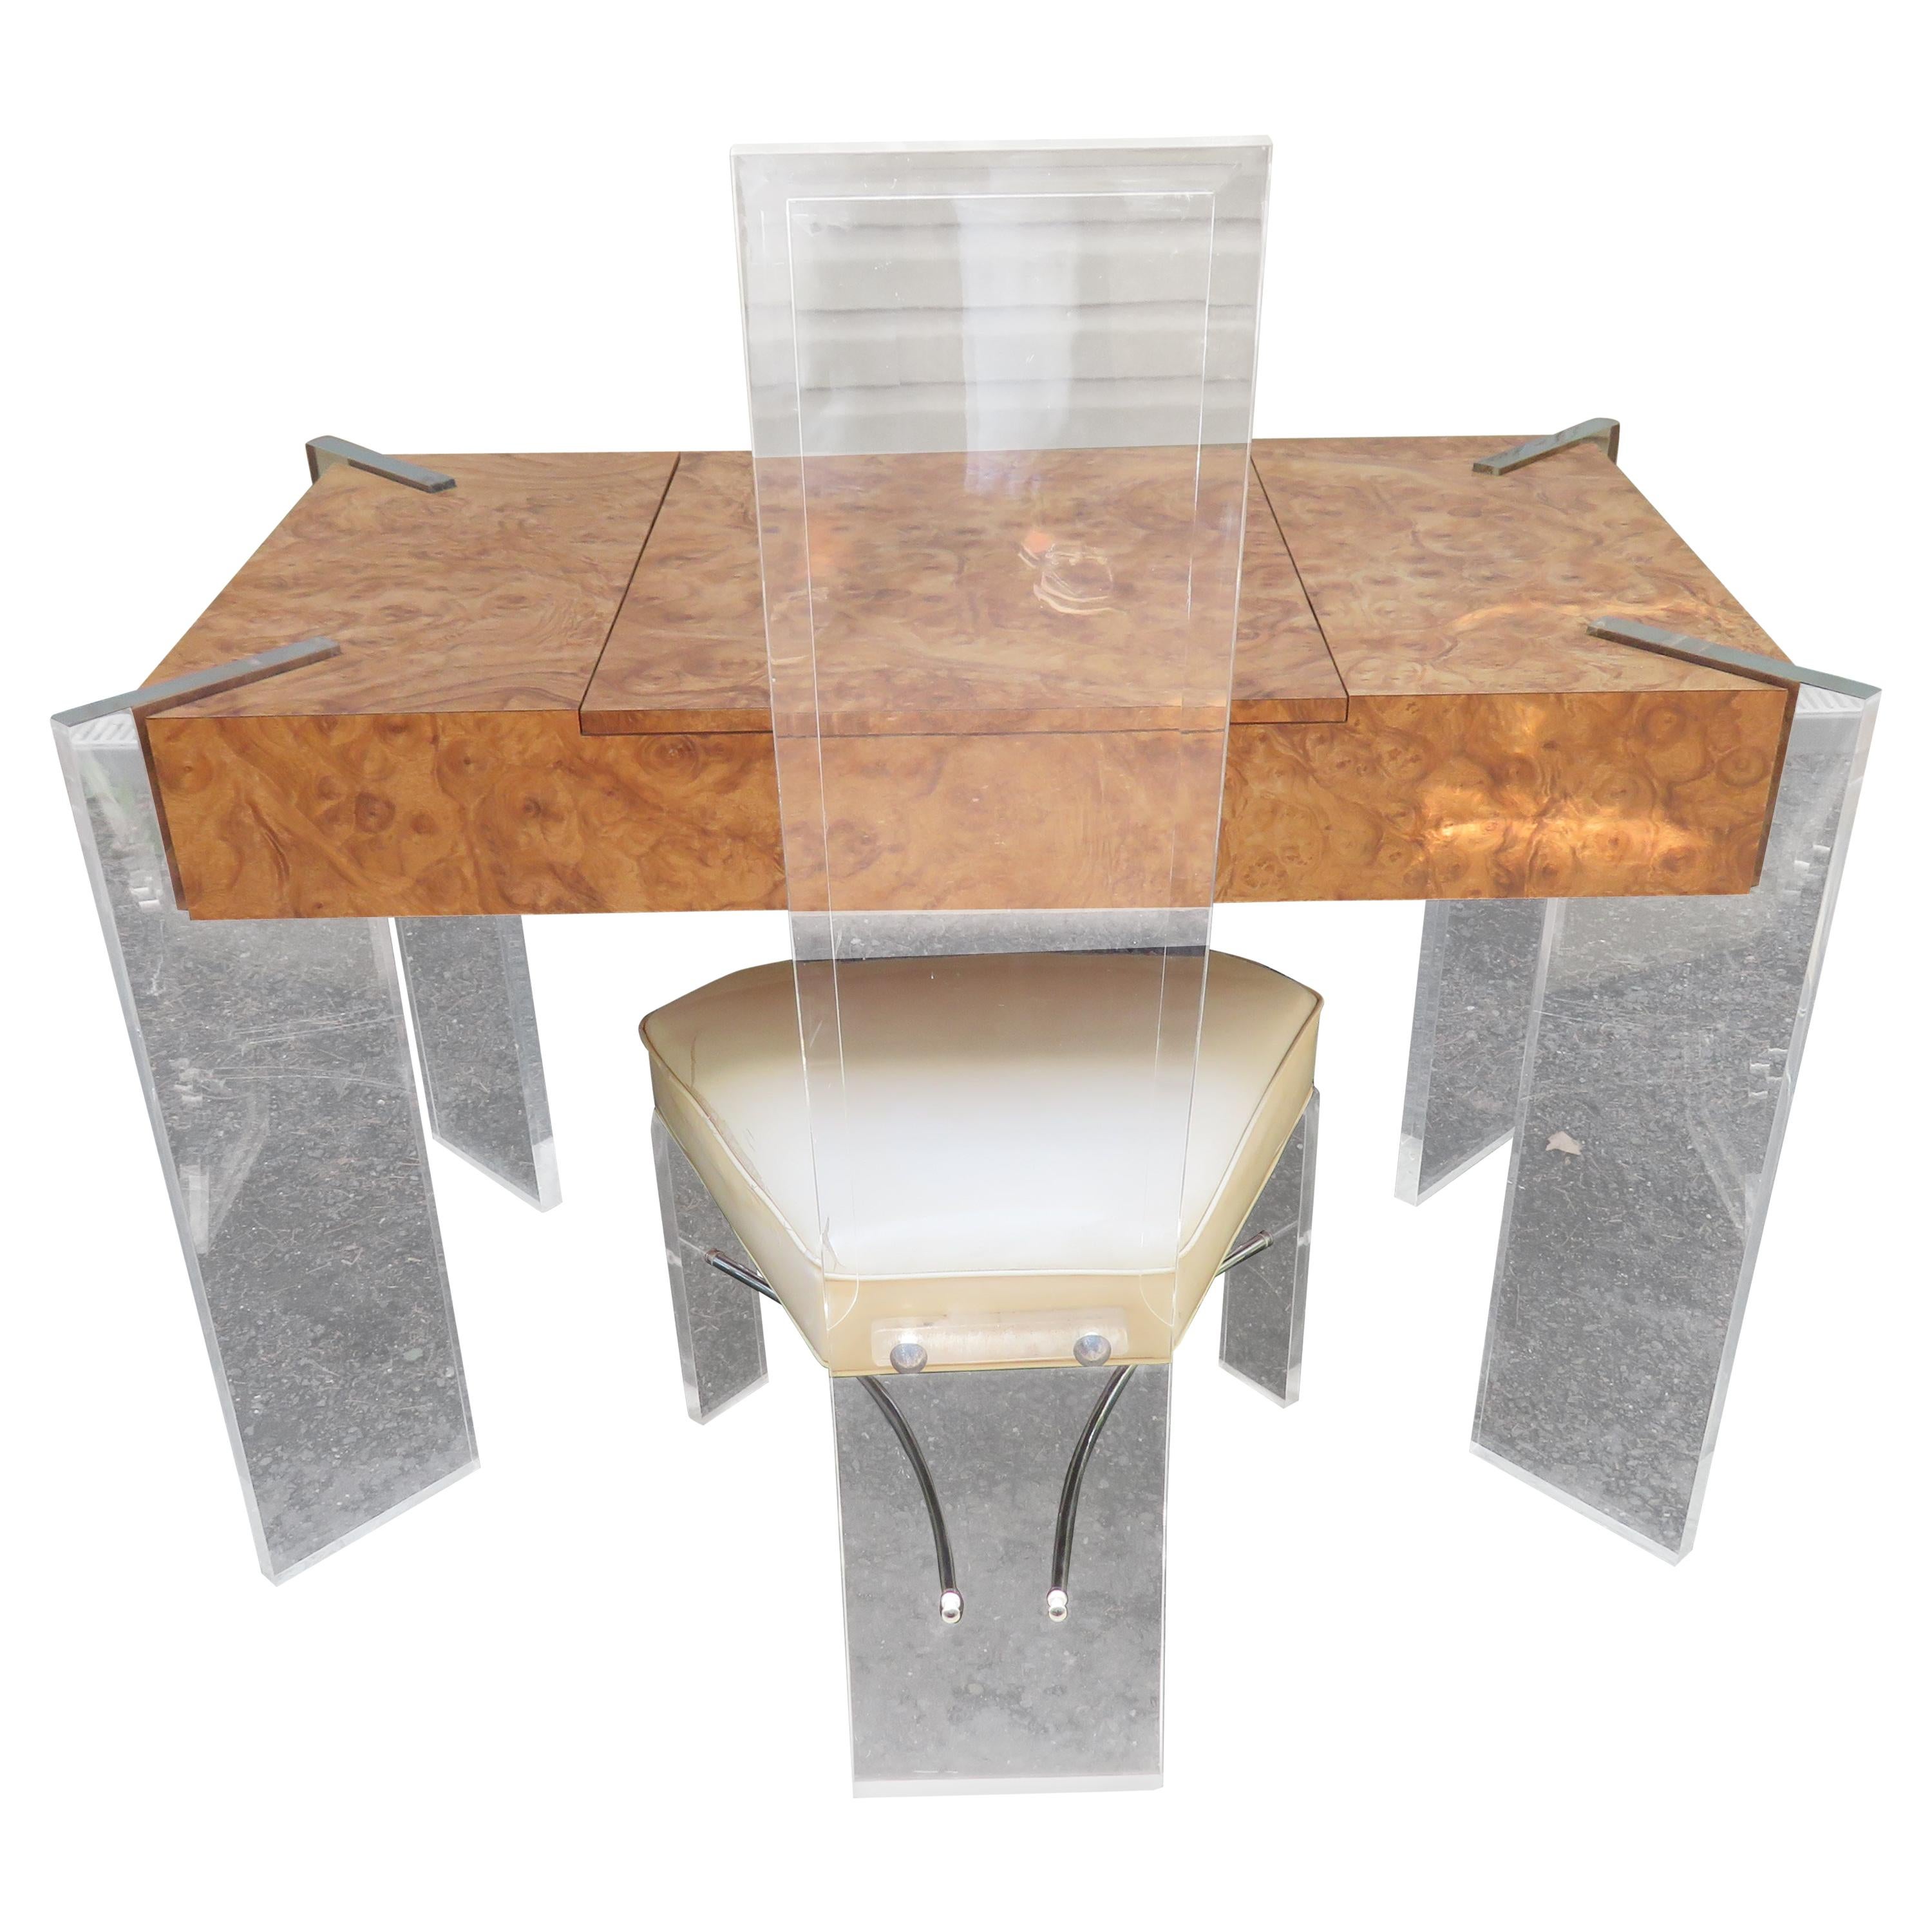 Handsome Burl Laminate Game Table Desk with Lucite Chair For Sale